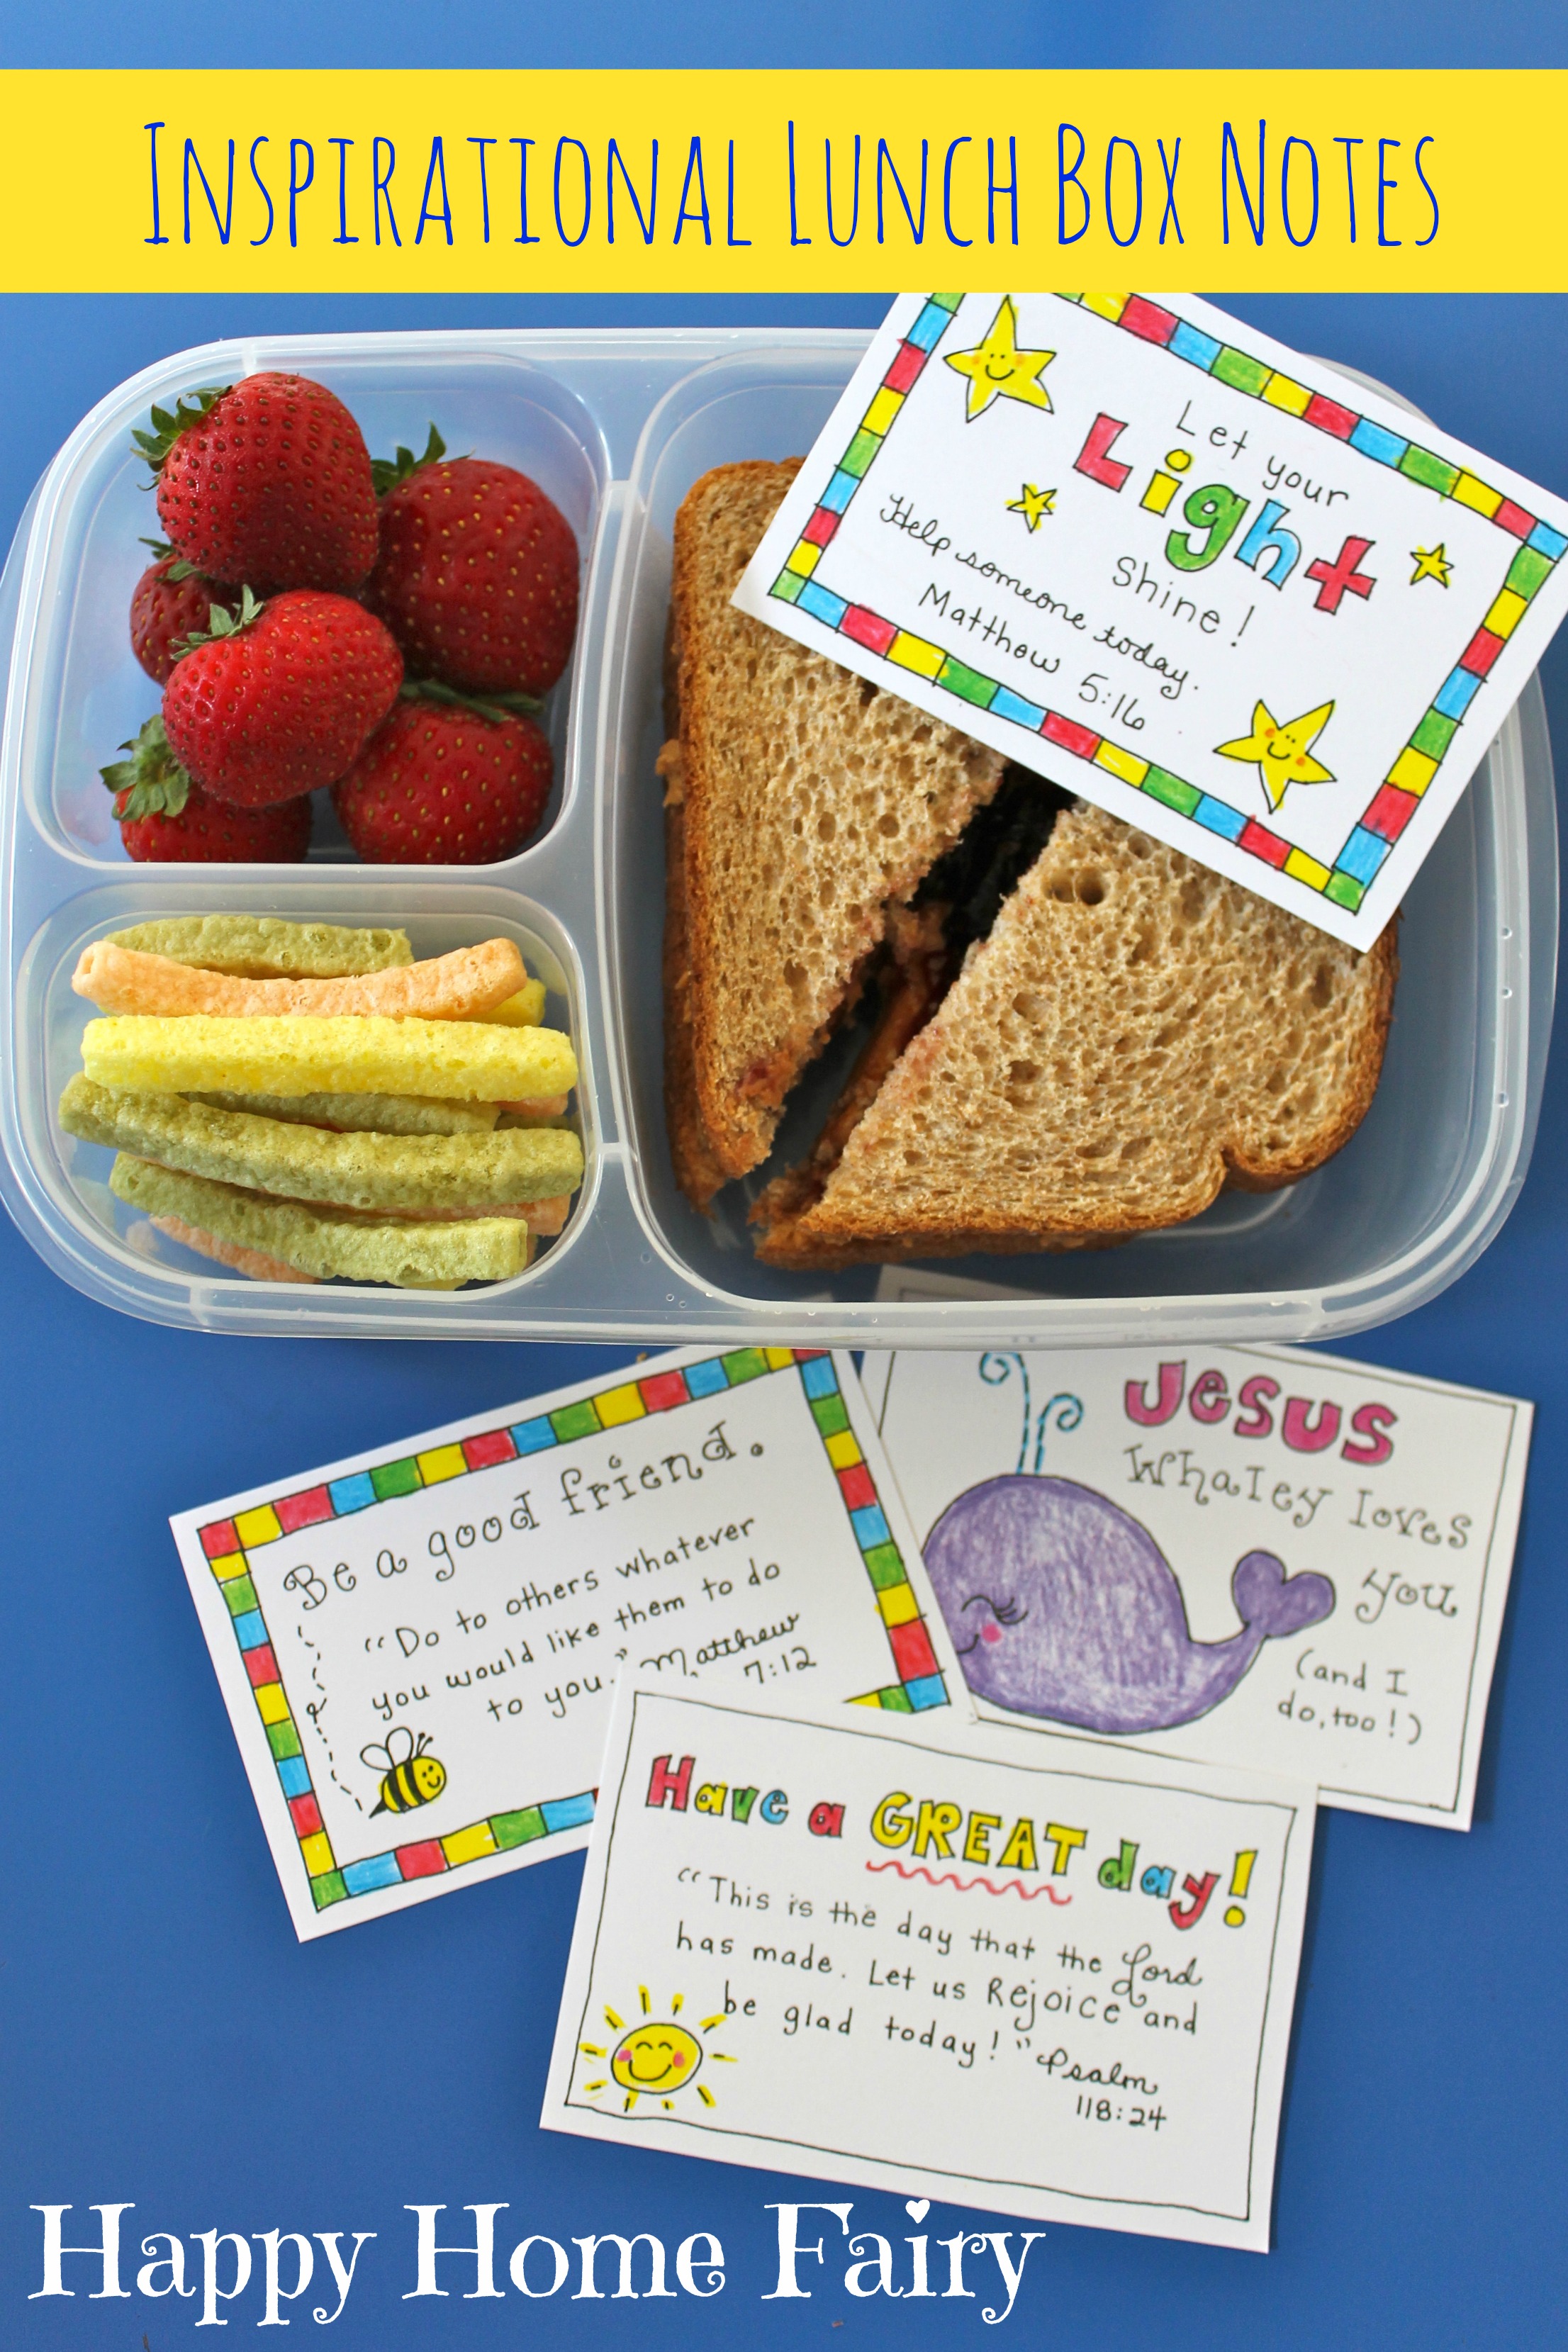 lunch box notes printable free